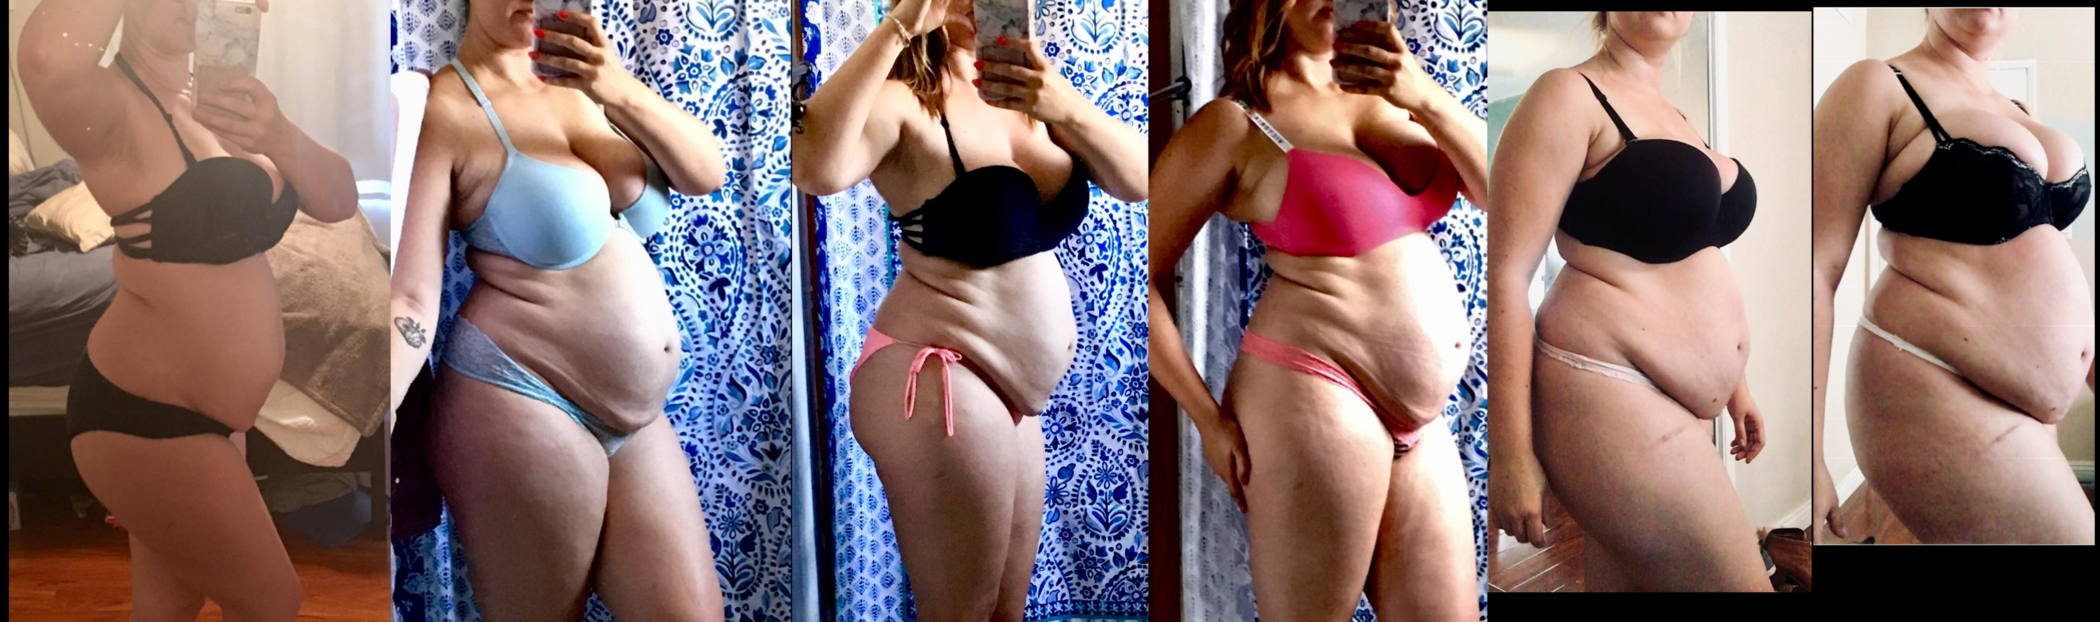 dillon crowder recommends angelique winters weight gain pic